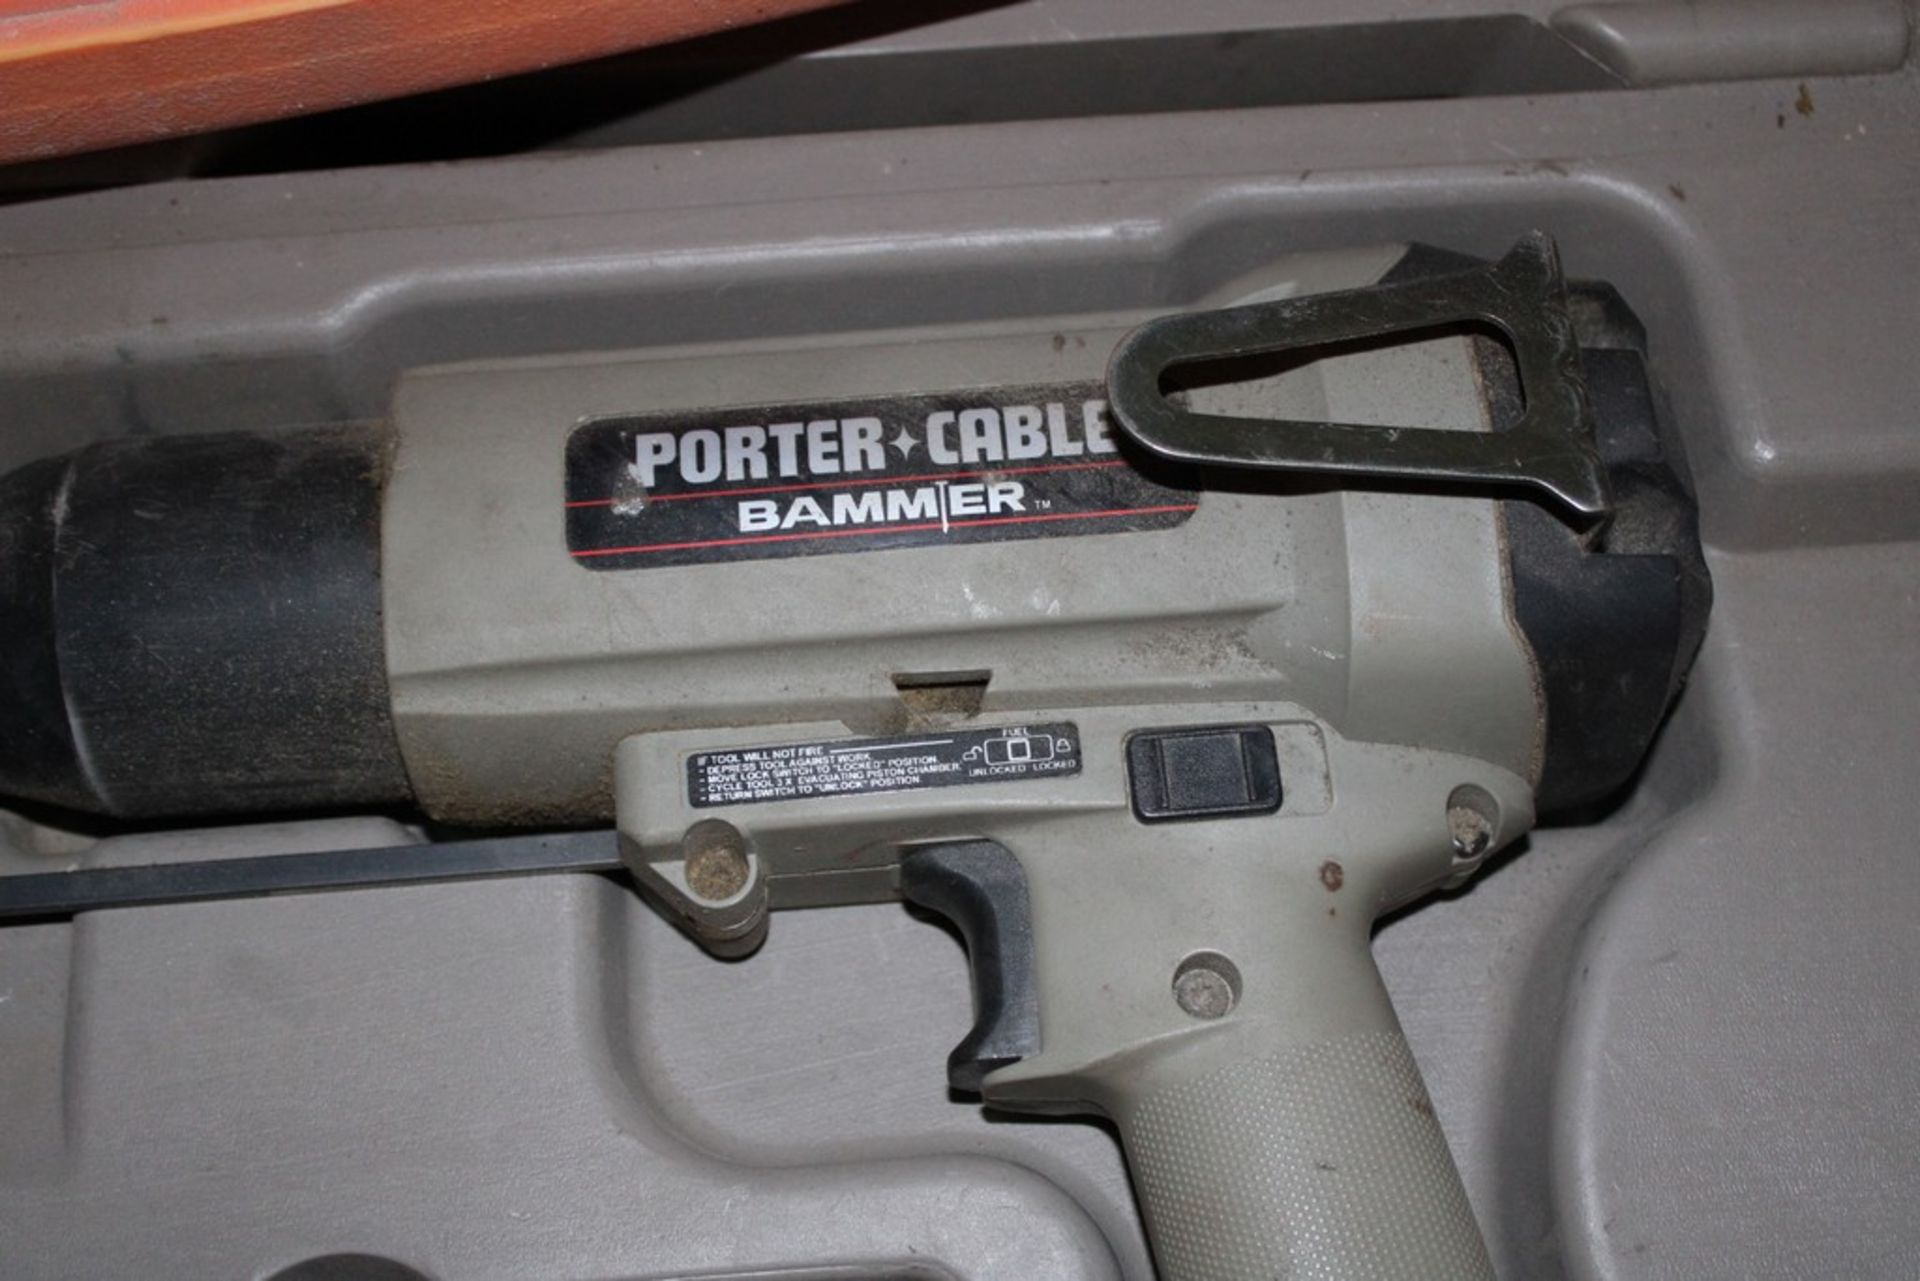 PORTER-CABLE "BAMMER" GAS POWERED NAIL GUN WITH CASE - Image 2 of 2